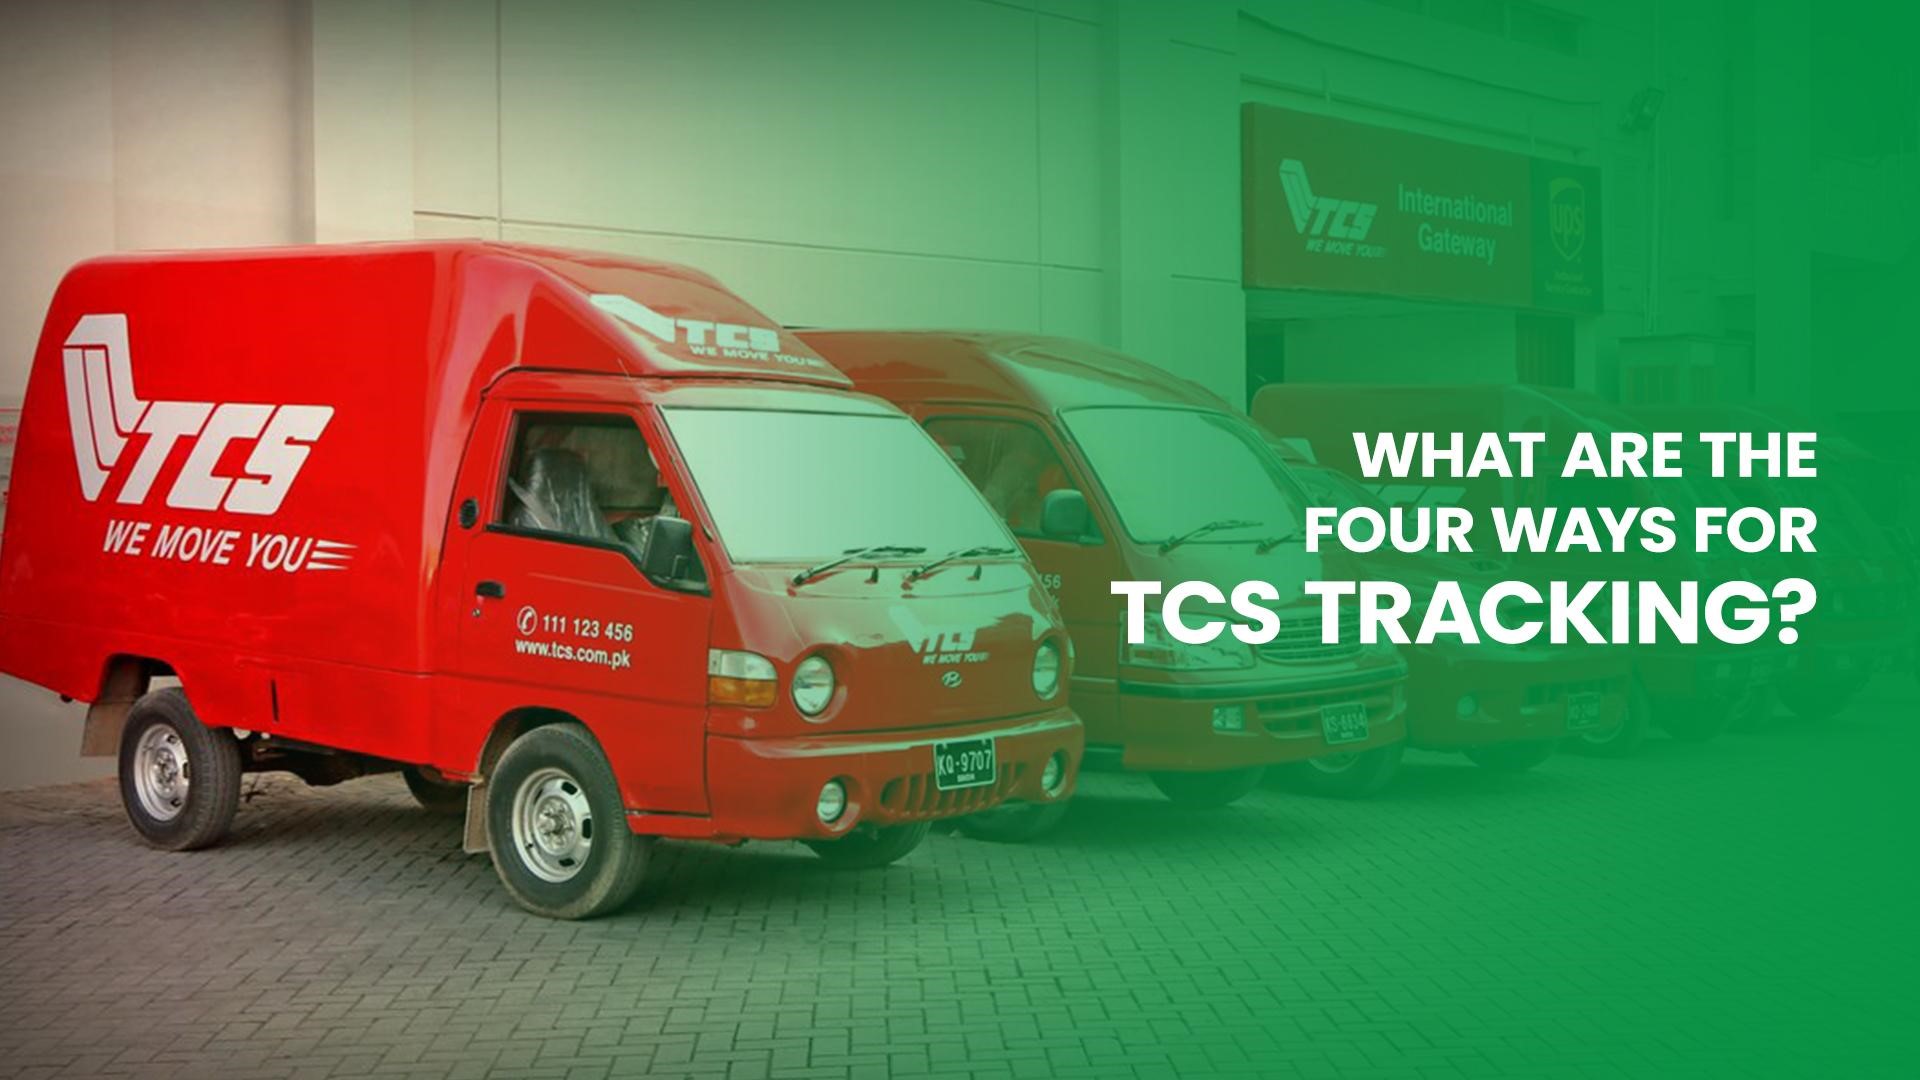 What are the four ways for TCS tracking?